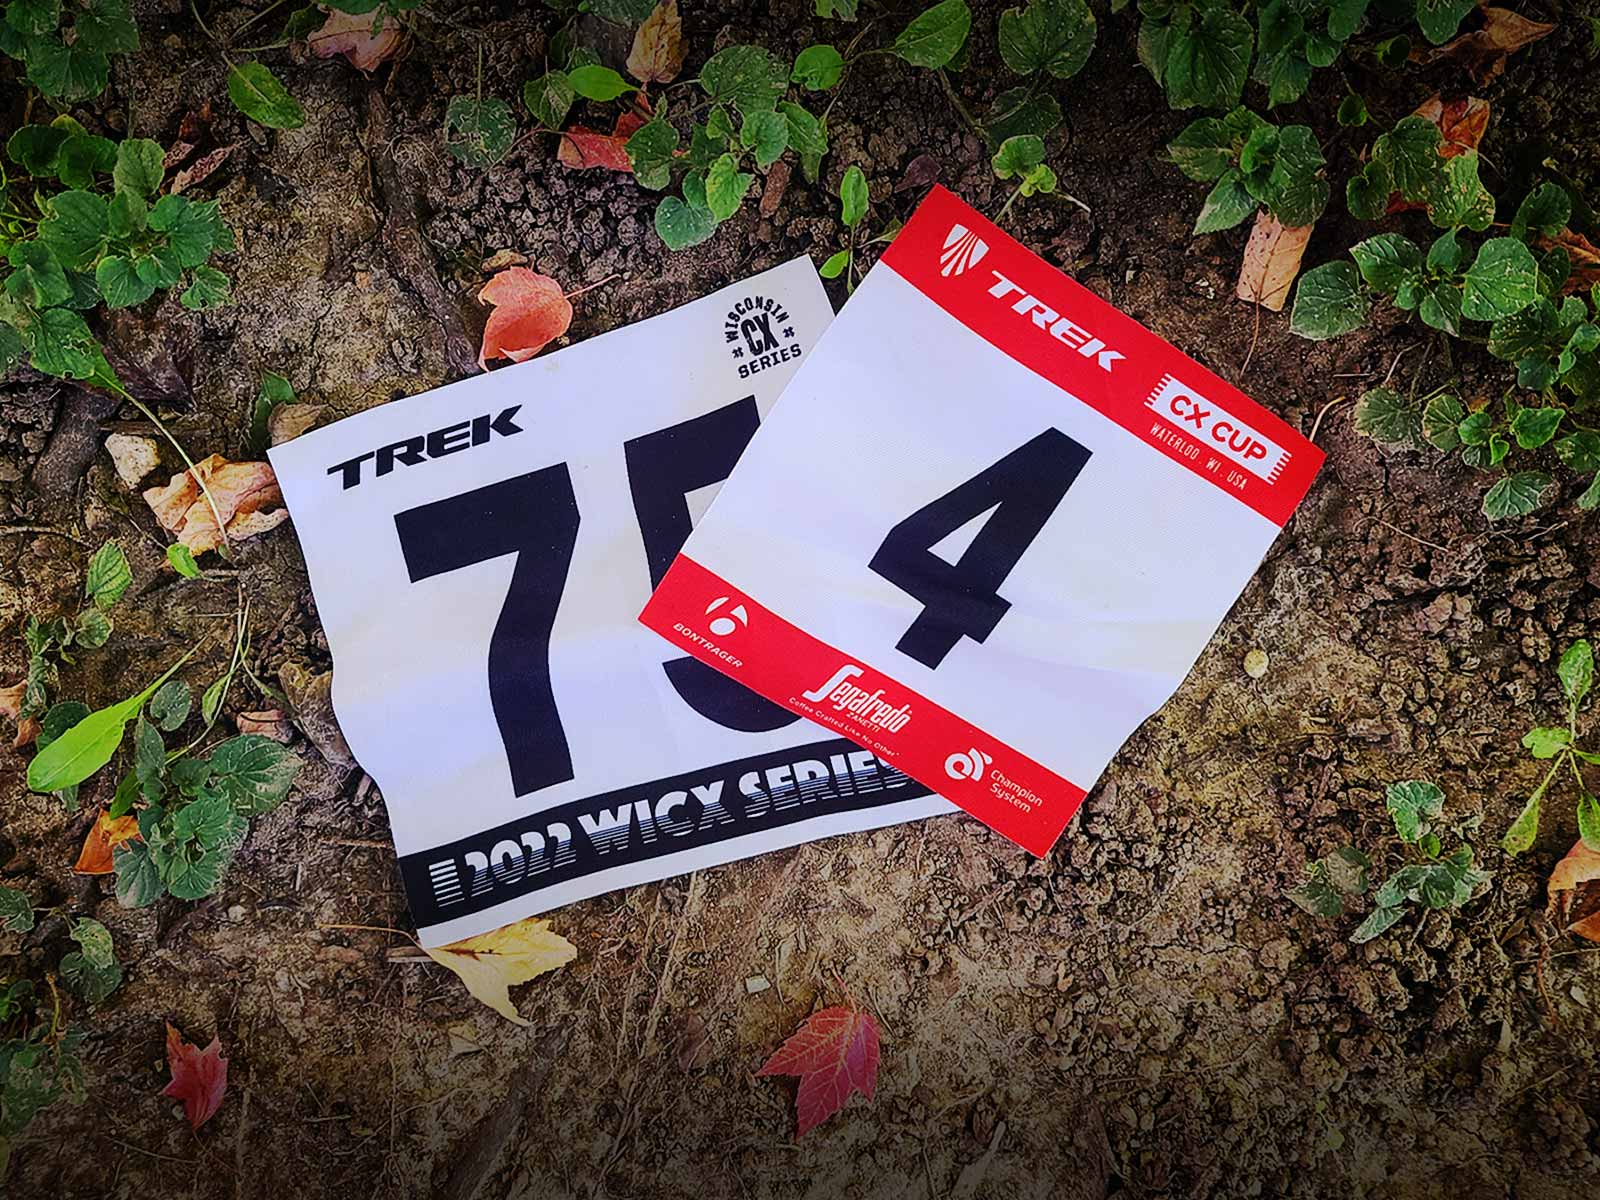 You will need a different number for Trek CX Cup